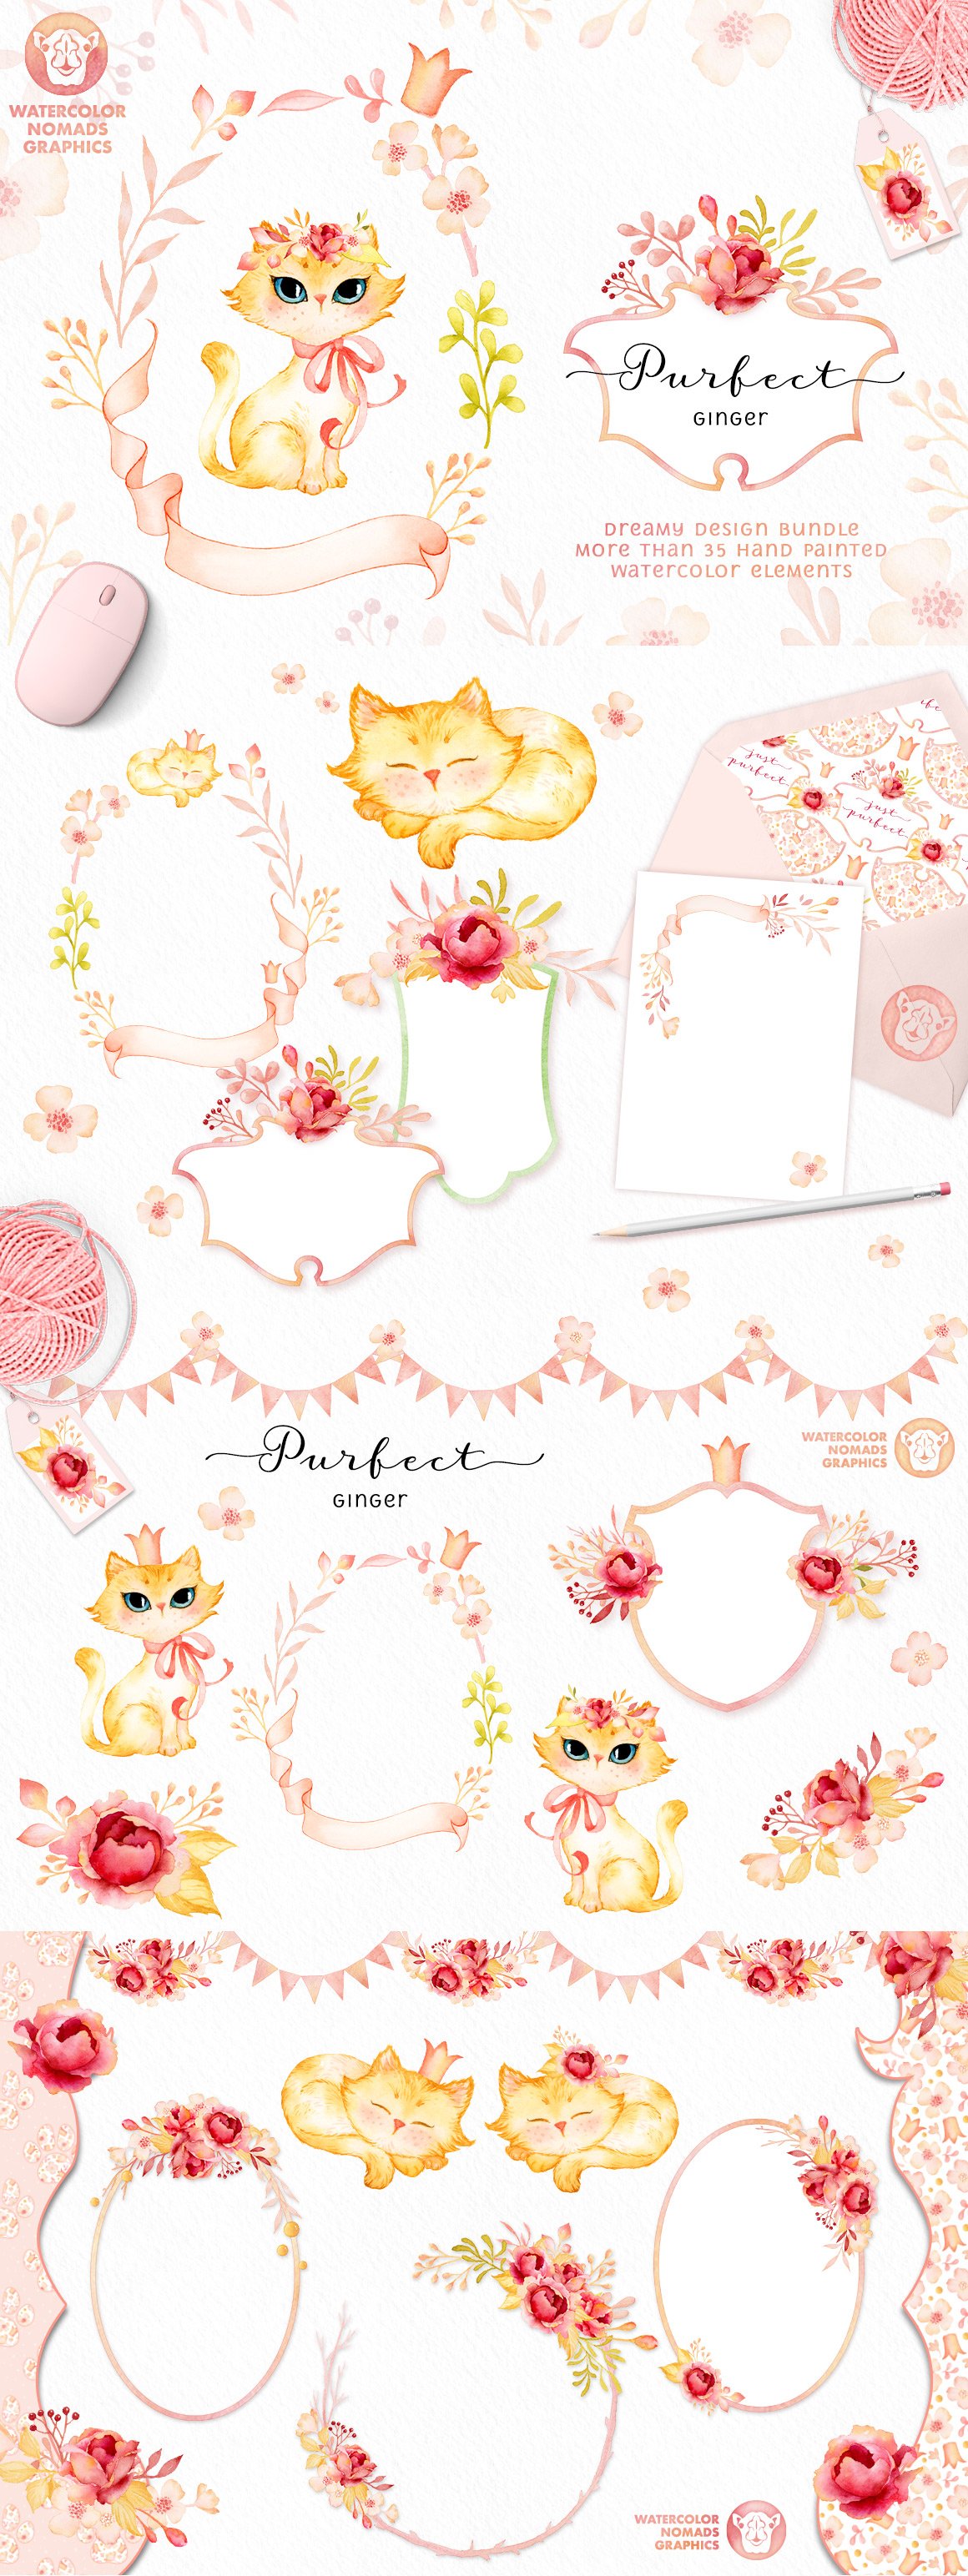 Purfect Ginger - Watercolor Roses and Cute Kittens